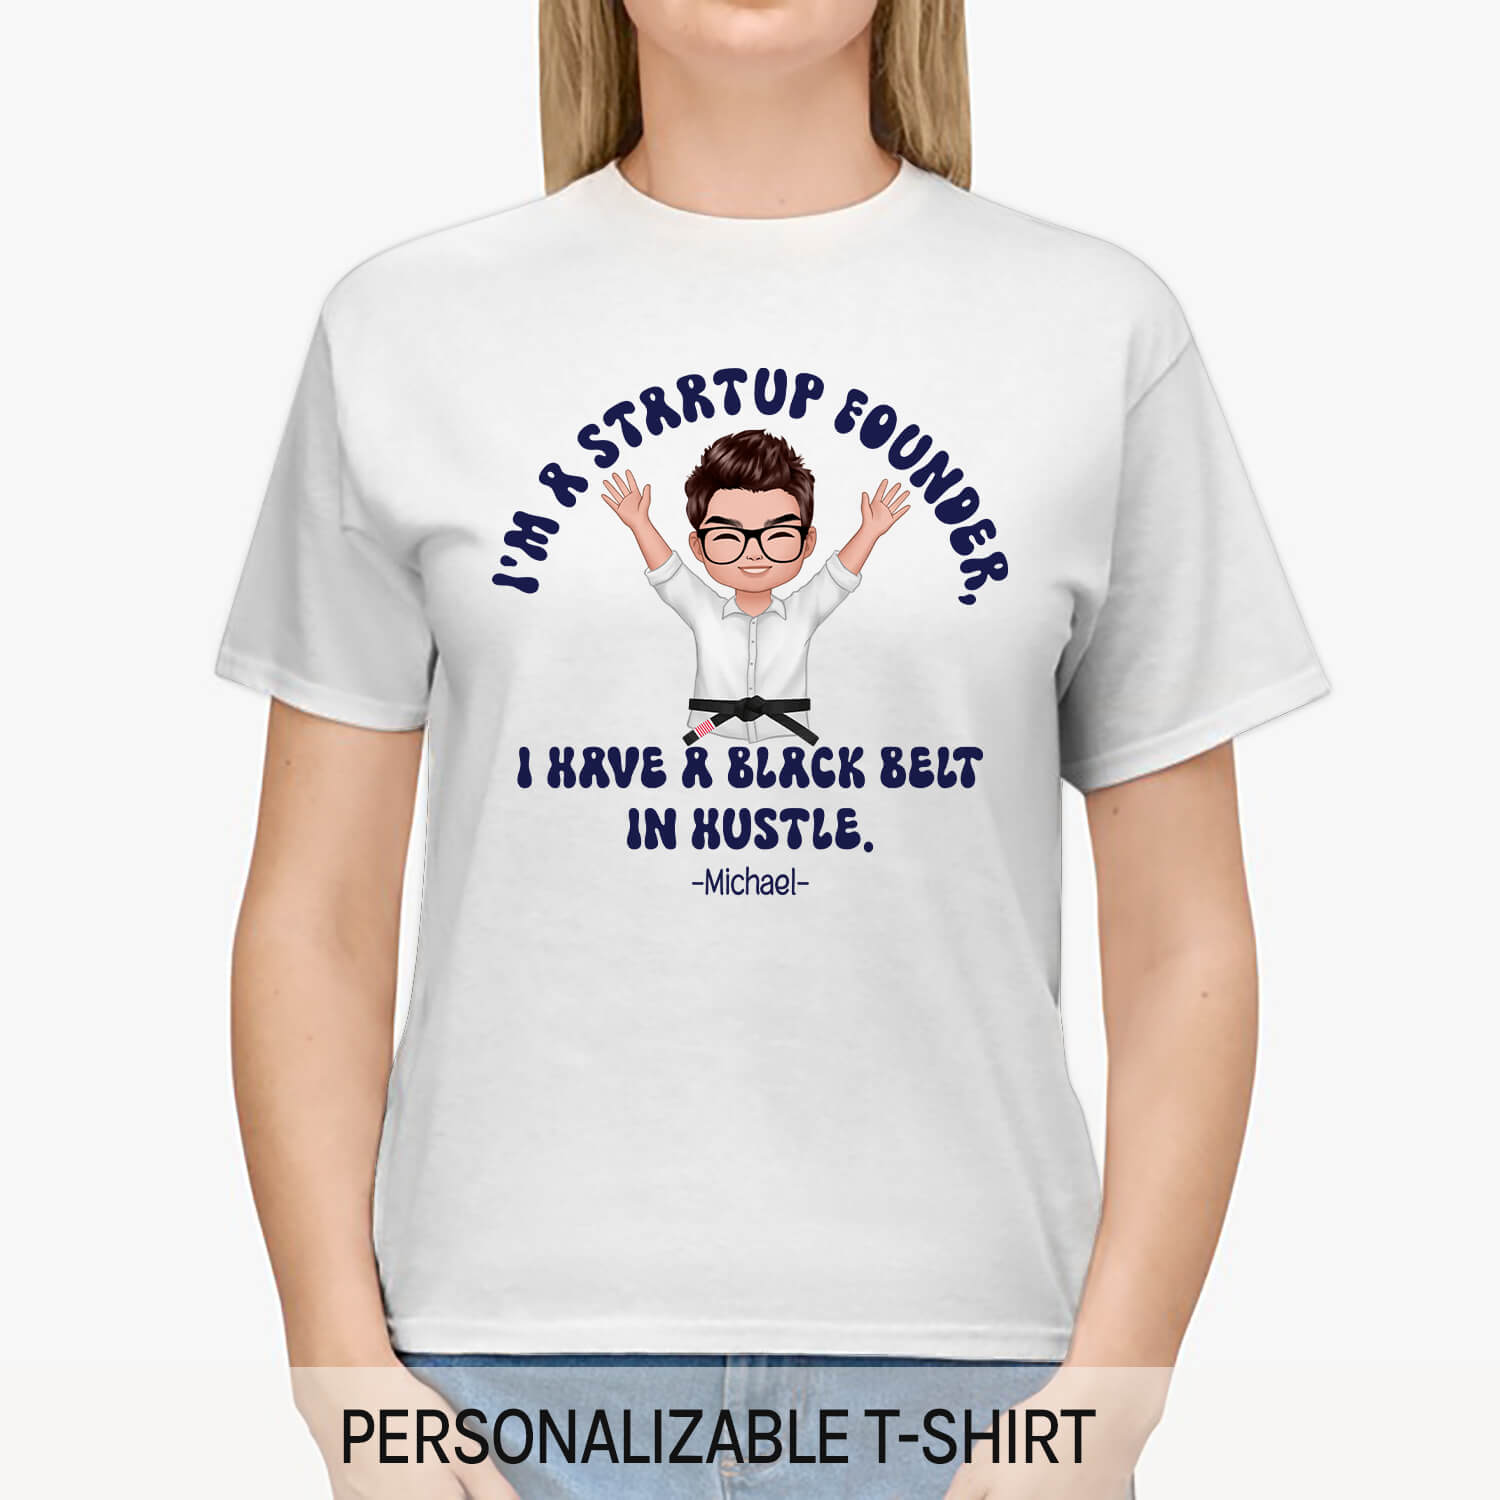 I'm a startup founder, I have a black belt in hustle - Personalized Birthday gift for Startup Founder - Custom Tshirt - MyMindfulGifts